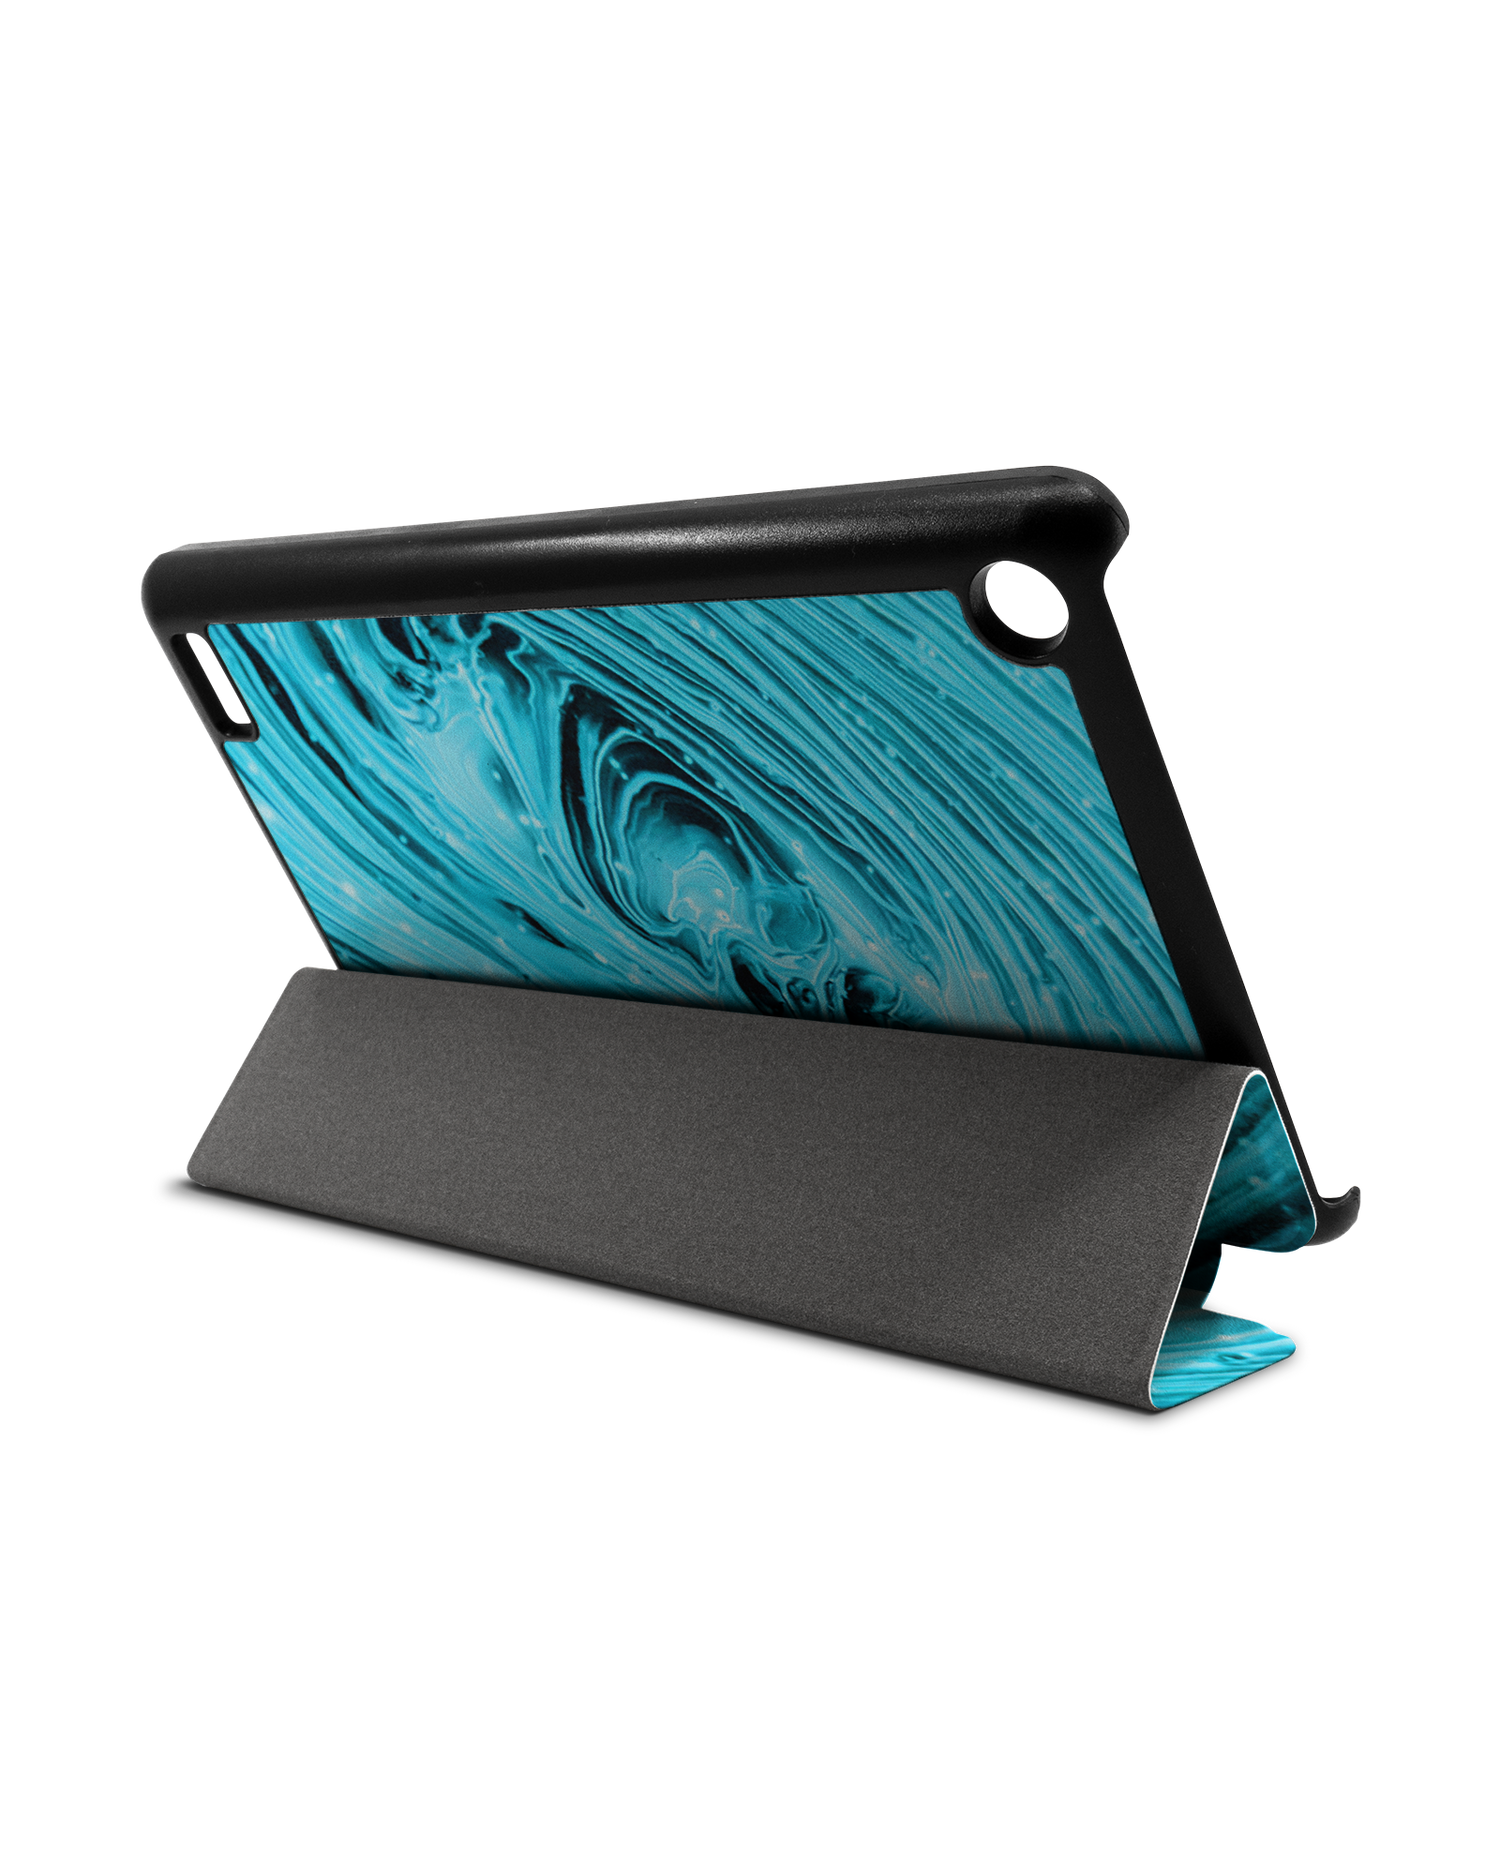 Turquoise Ripples Tablet Smart Case for Amazon Fire 7: Used as Stand